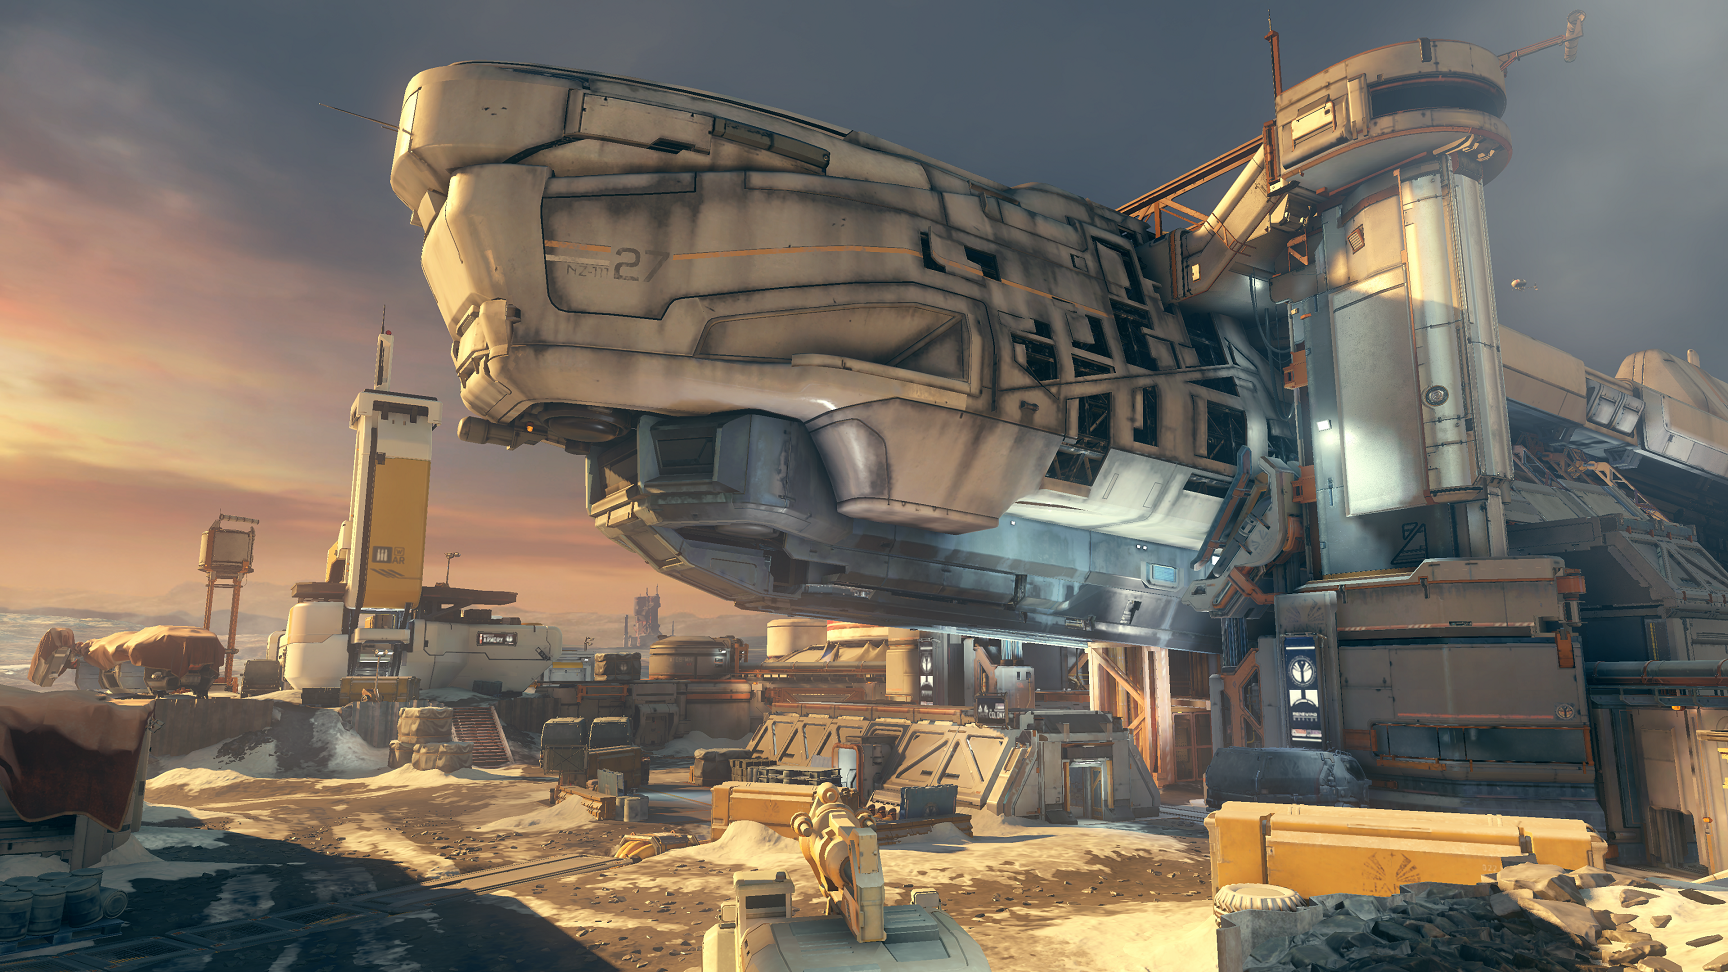 Halo 5 Warzone Firefight Gameplay Shows Ambitious New Multiplayer